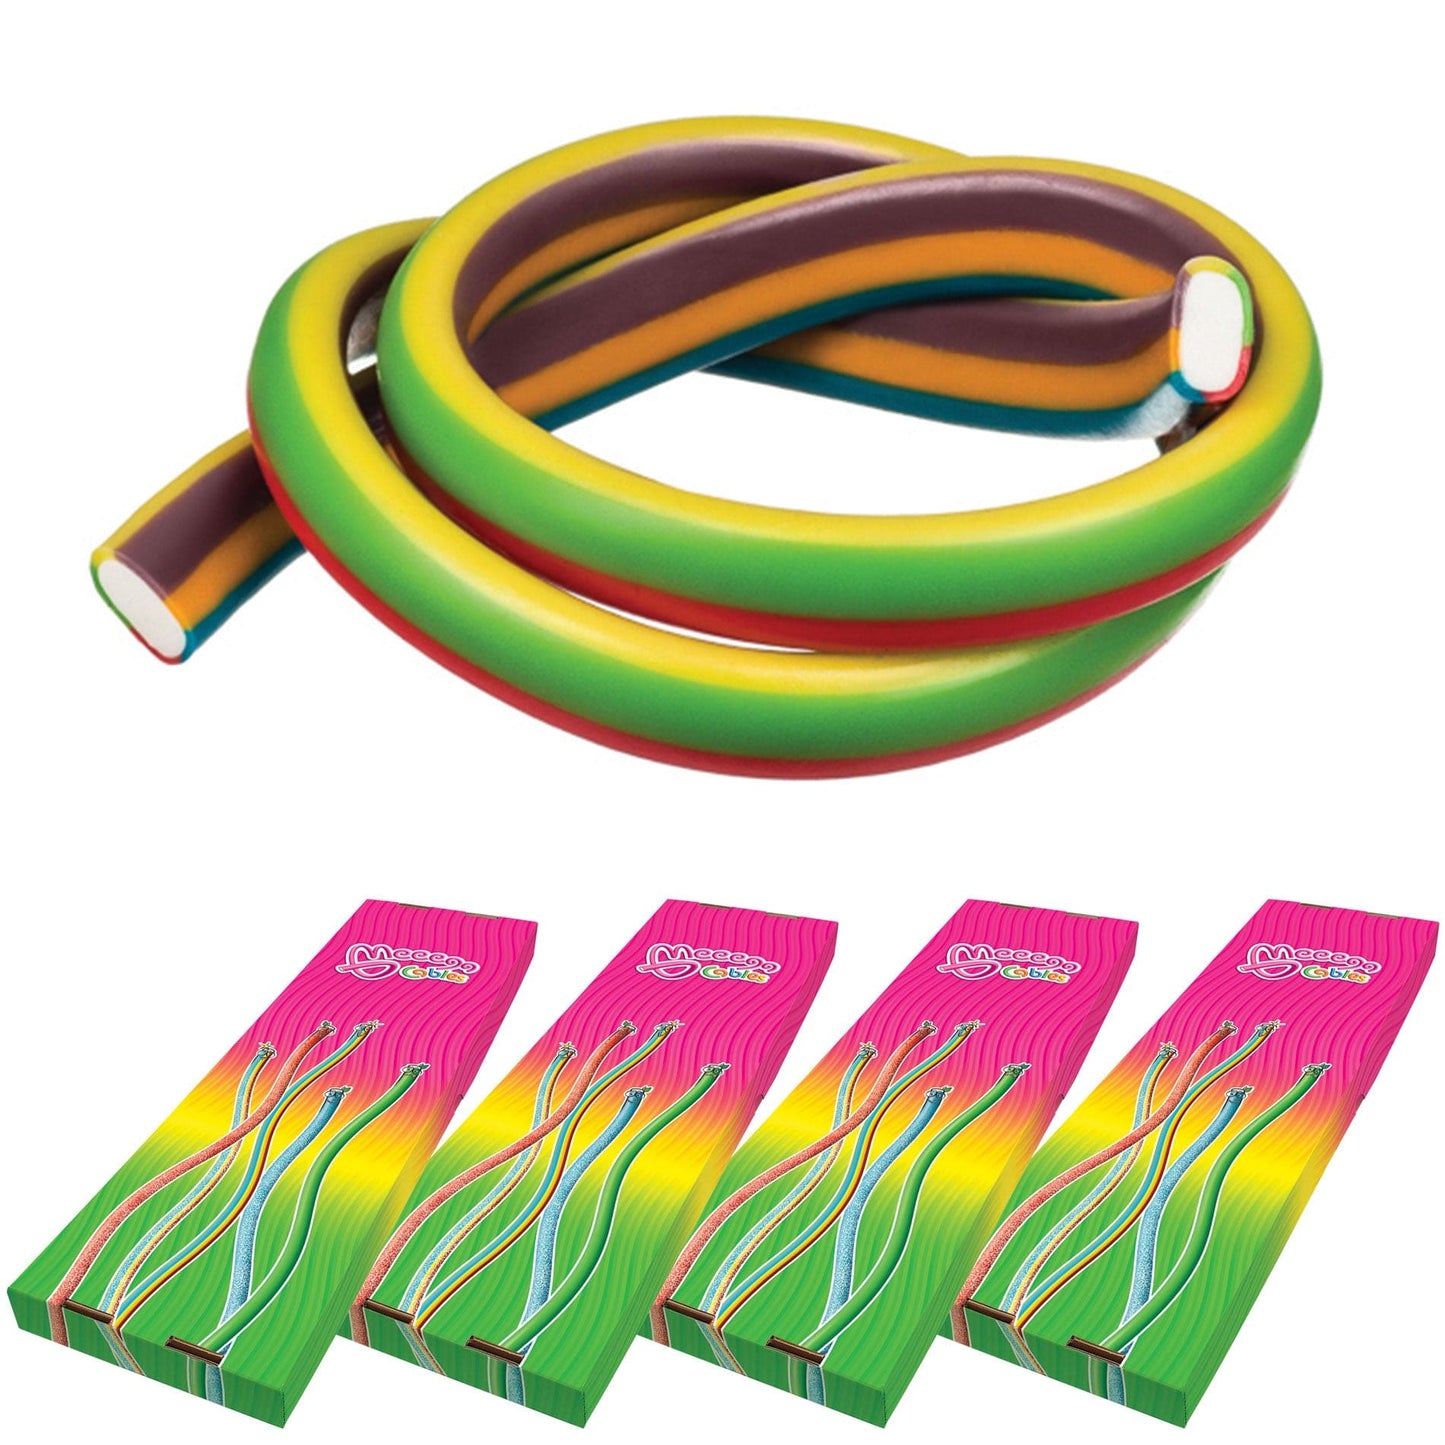 Novelty Concessions Gummy Rope SUNSHINE FRUIT / 4 Pack (120 pieces) Meeega Cables European Chewy Rope Candy - Box of 30 individually wrapped Meeega Cables, each over 2-feet long cups with lids and straws